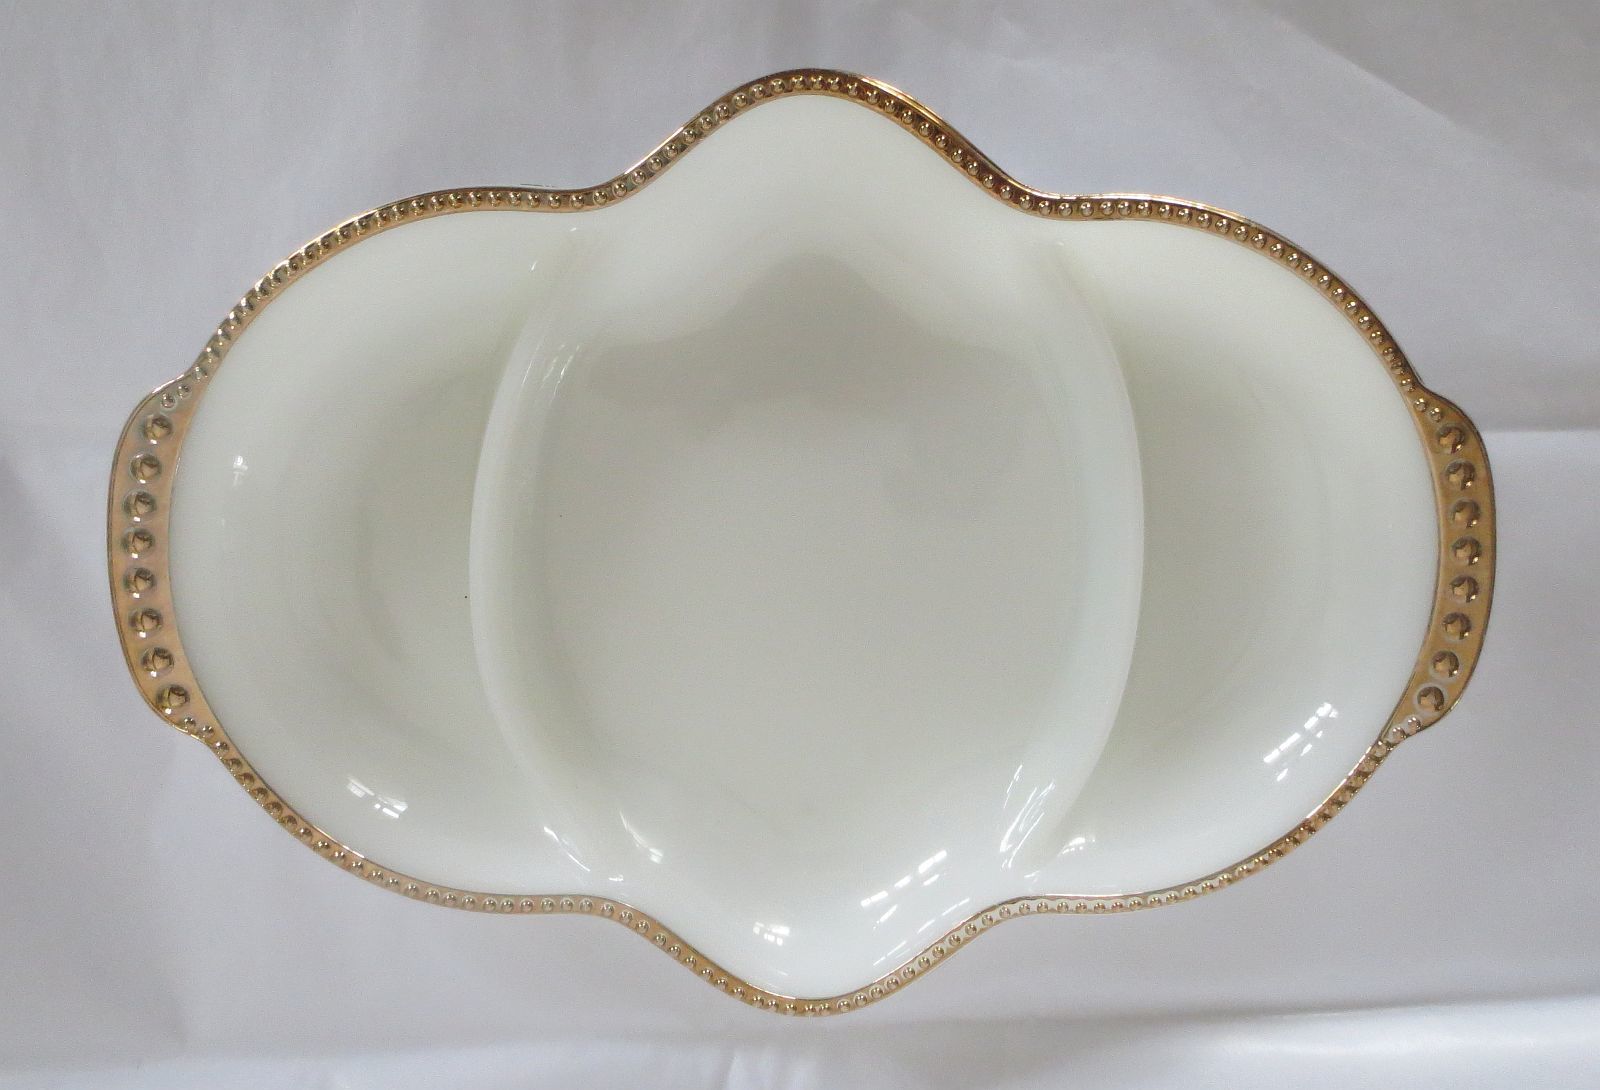 Primary image for VTG Anchor Hocking Fire King Milk Glass 3 Section Divided Serving Dish Gold Trim